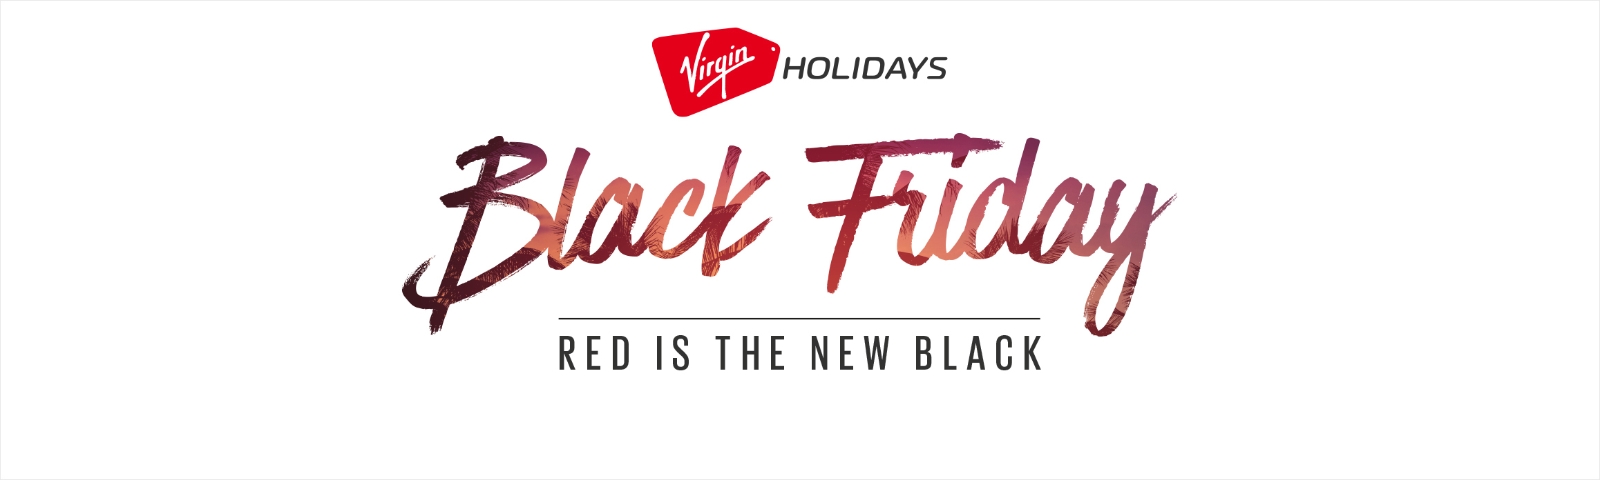 Black Friday Holiday Deals 2019 | Virgin Holidays - Will There Be Any Cruise Deals For Black Friday